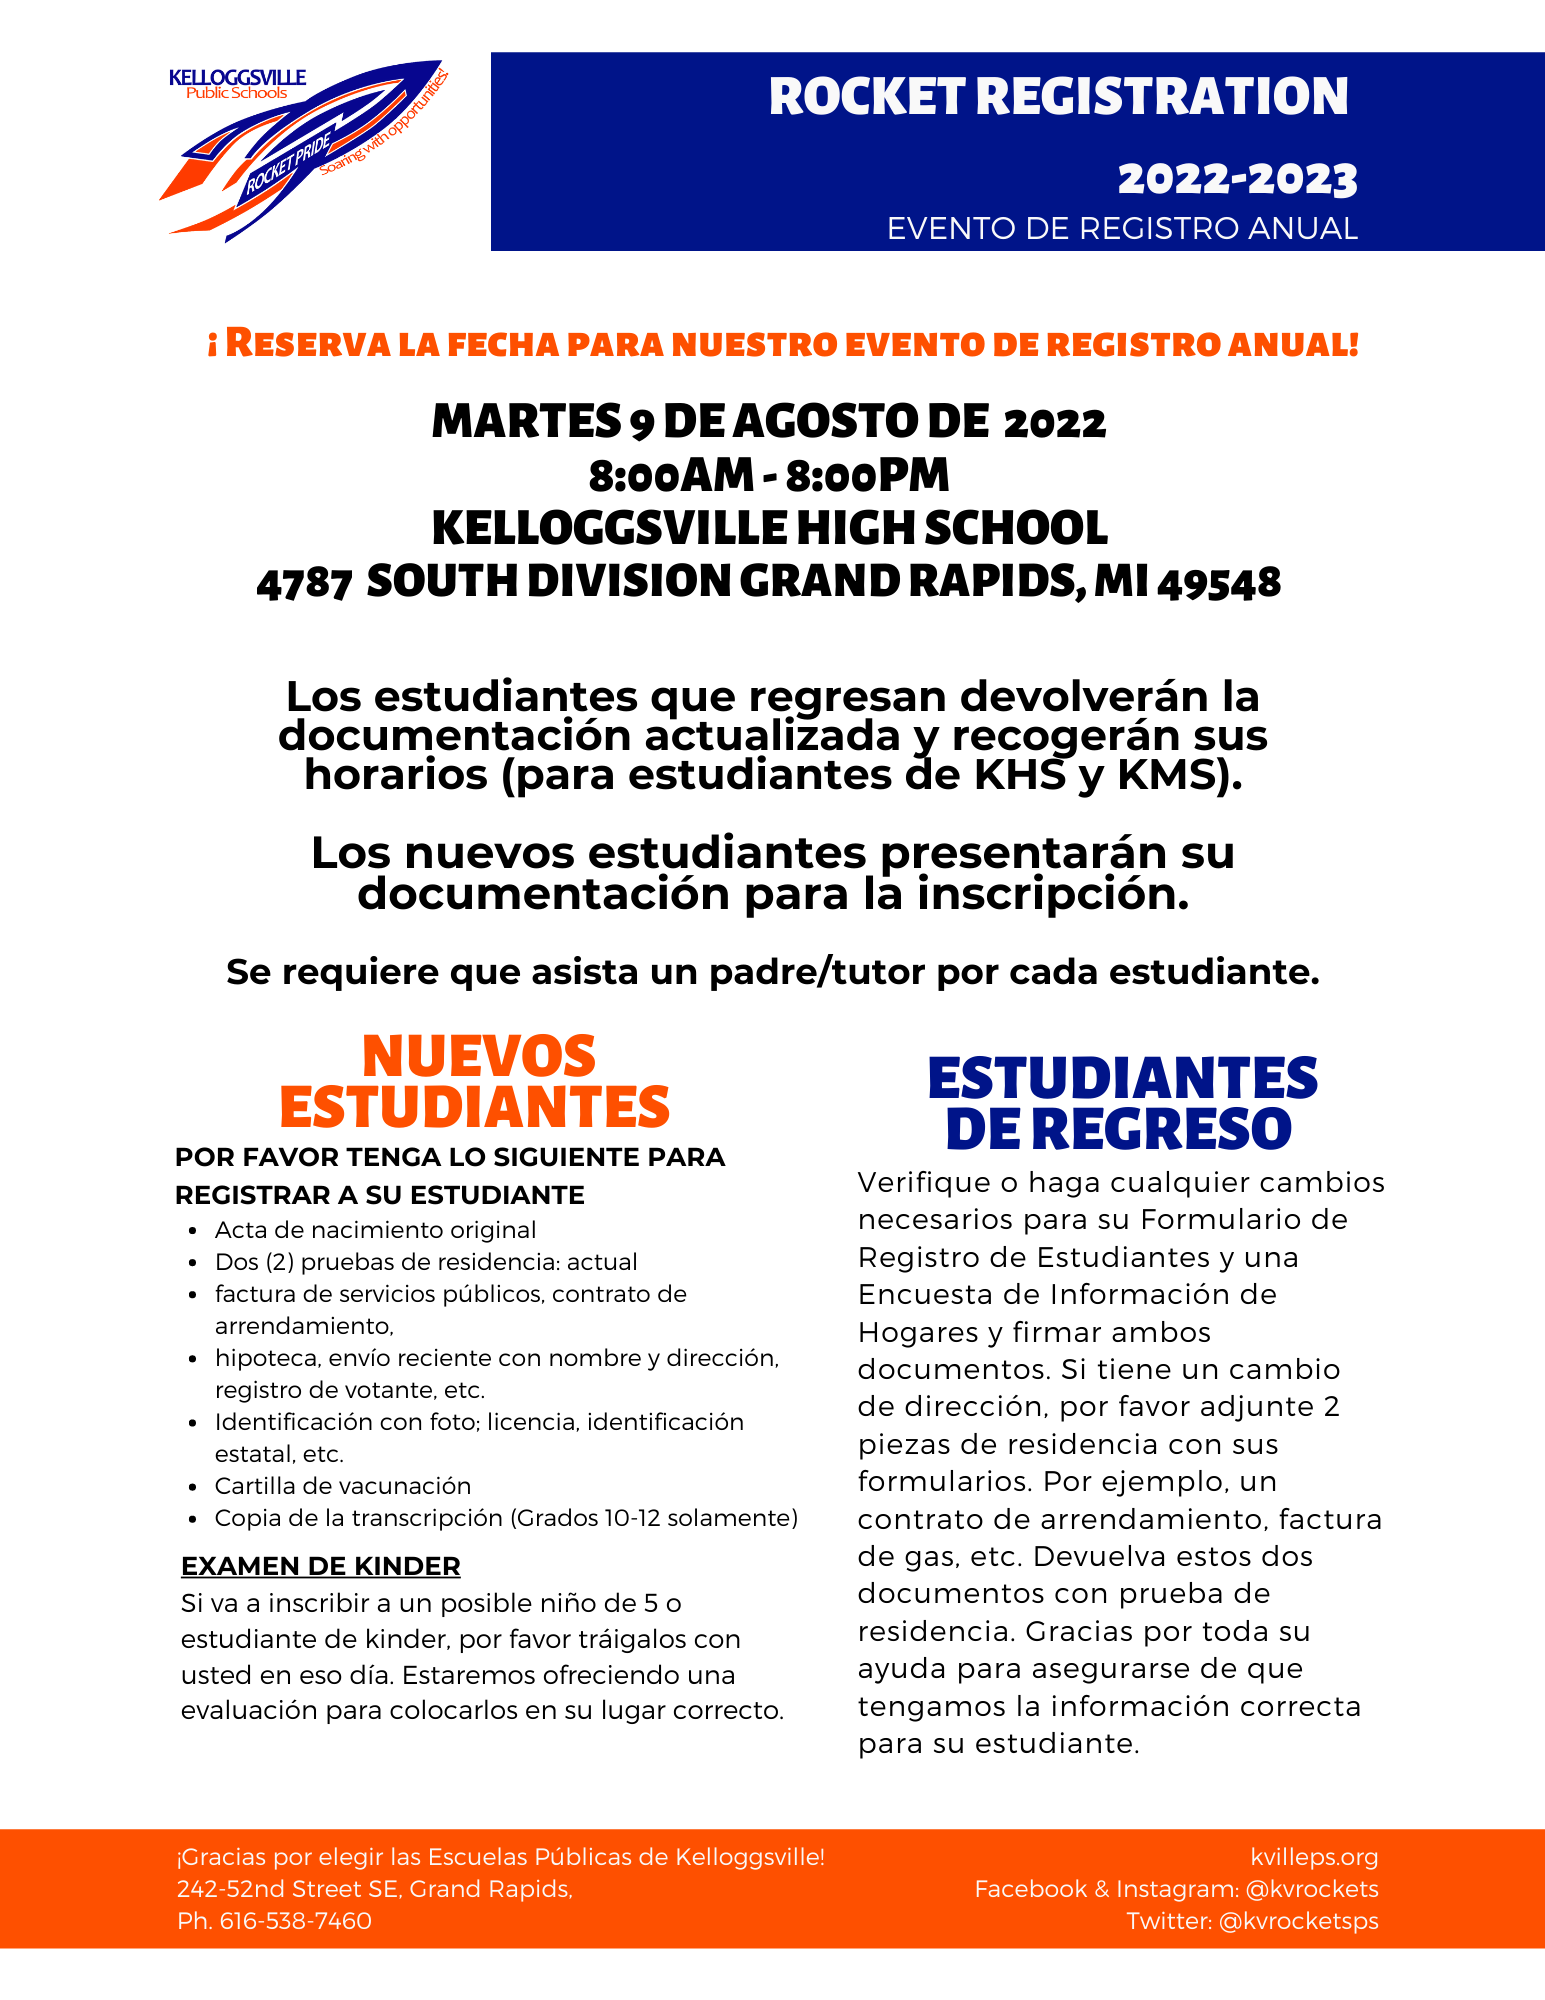 Rocket Registration 2022 detailed info in Spanish August 9th 22